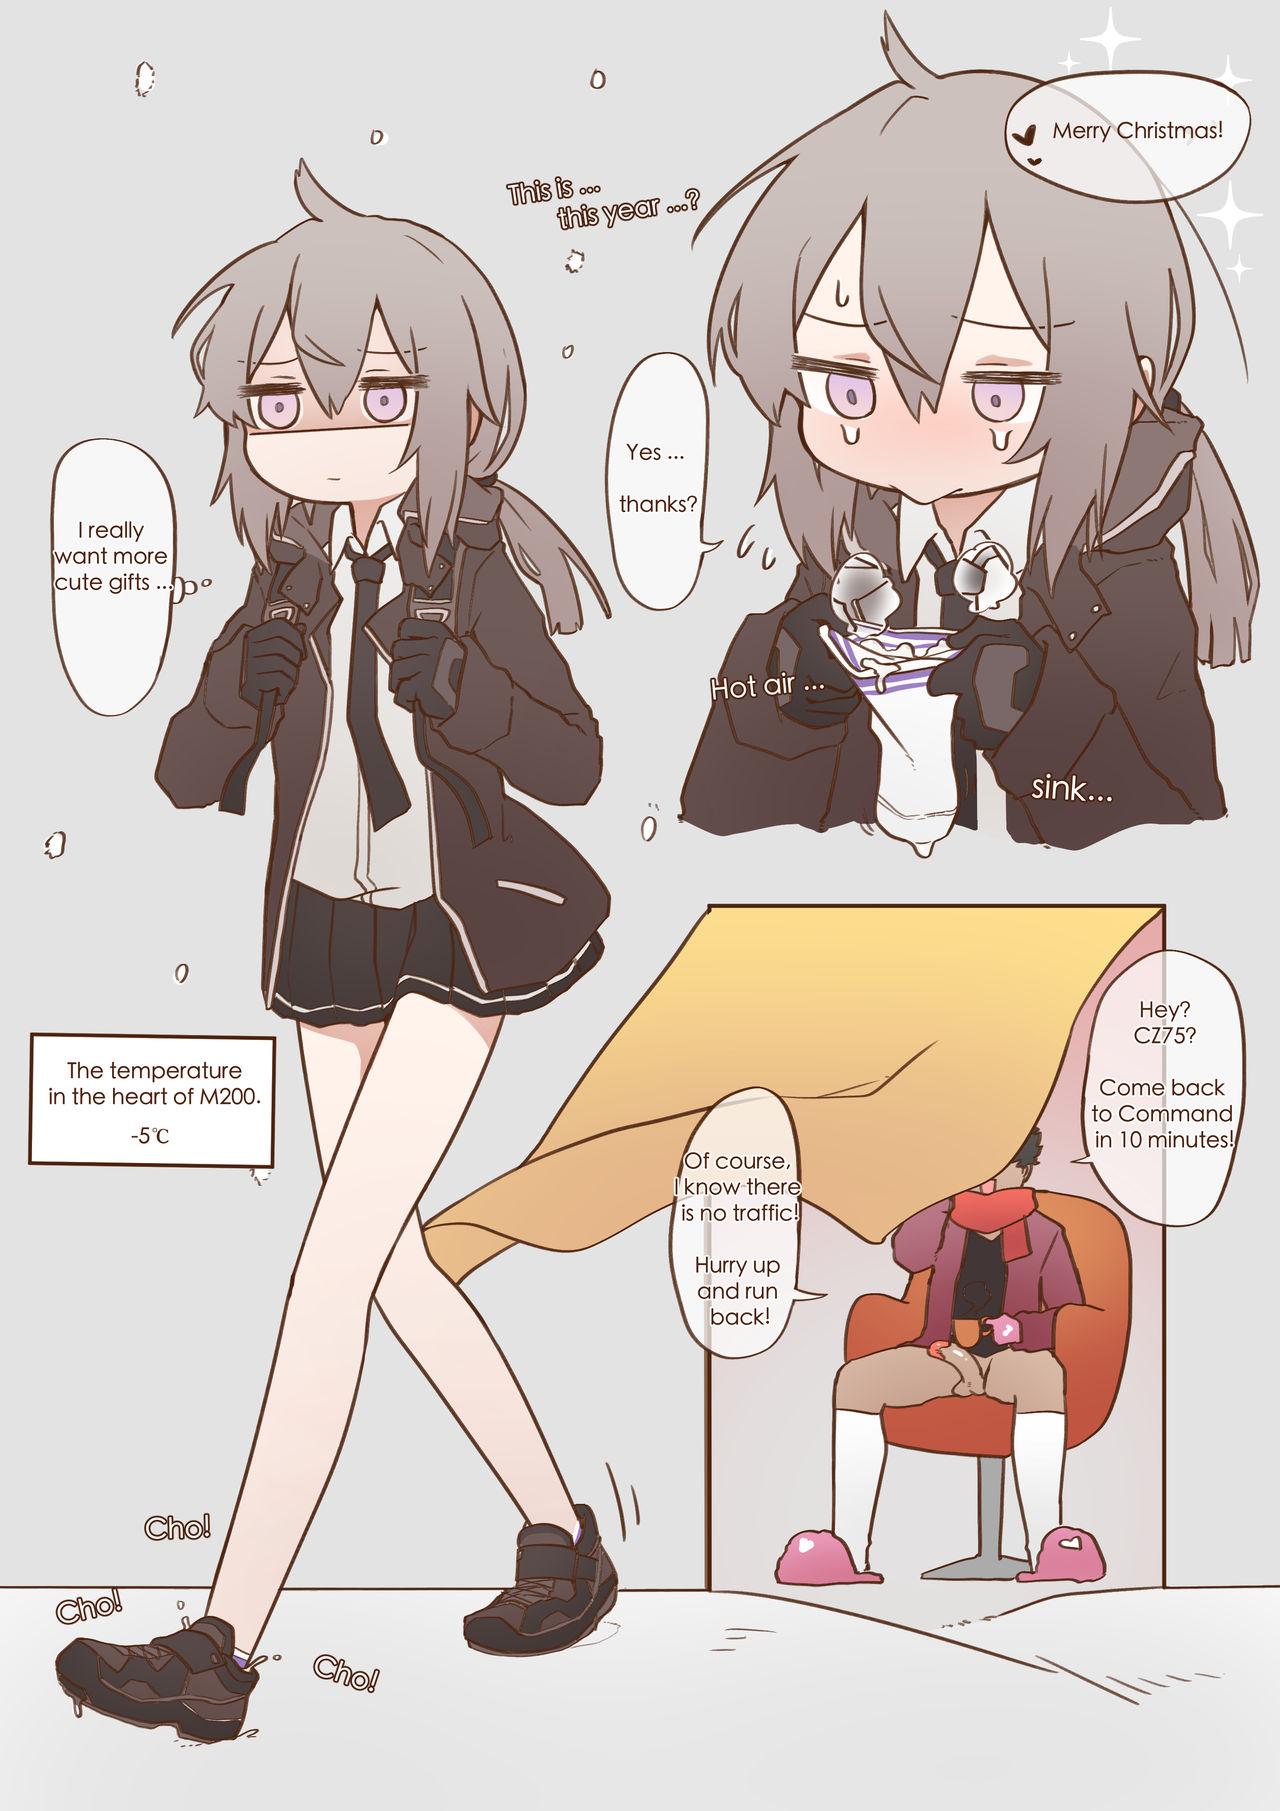 Monster M200! - Girls frontline Chibola - Page 6